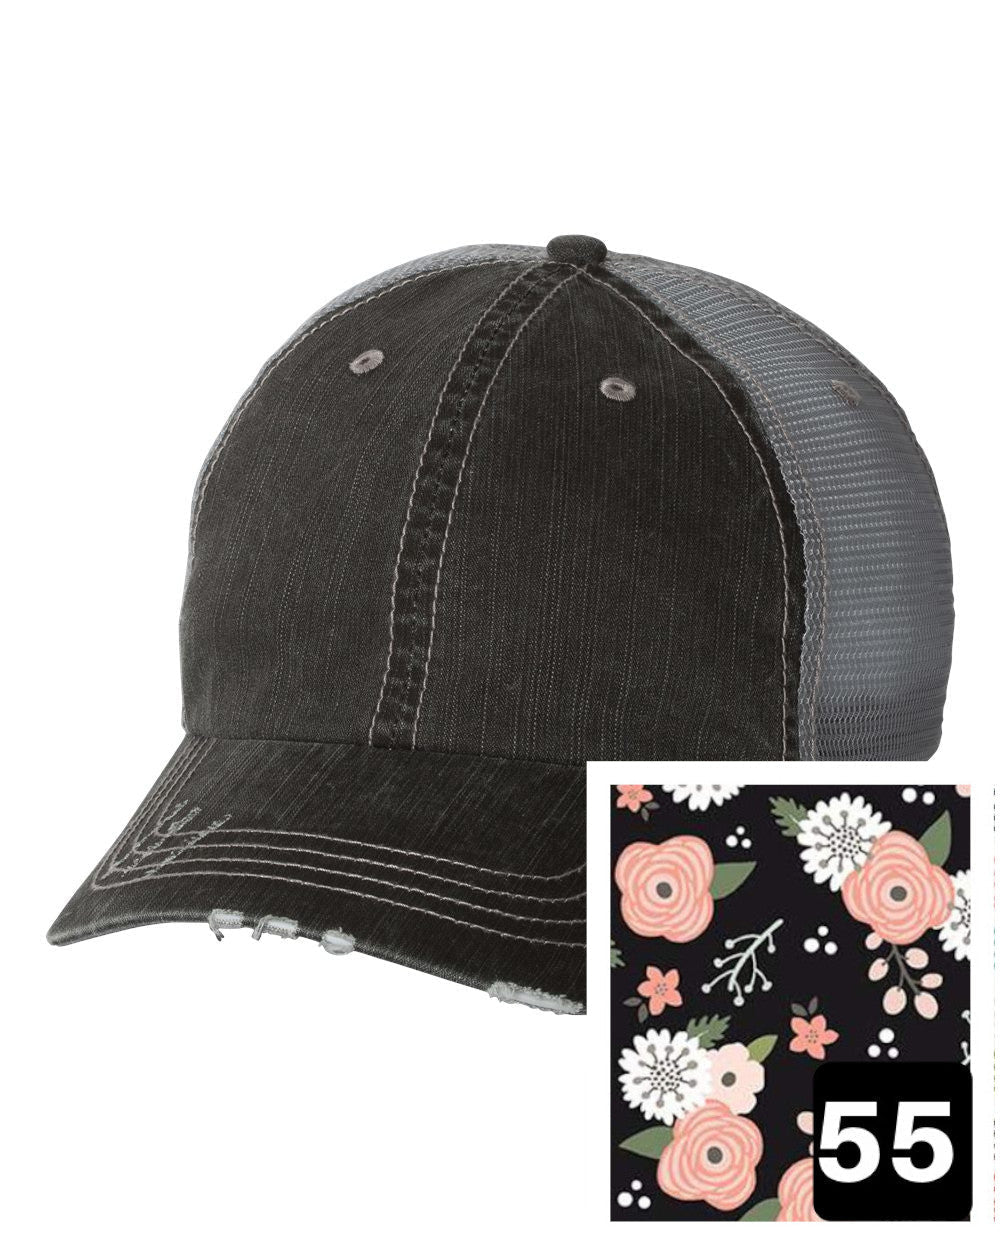 gray distressed trucker hat with petite floral on navy fabric state of Tennessee